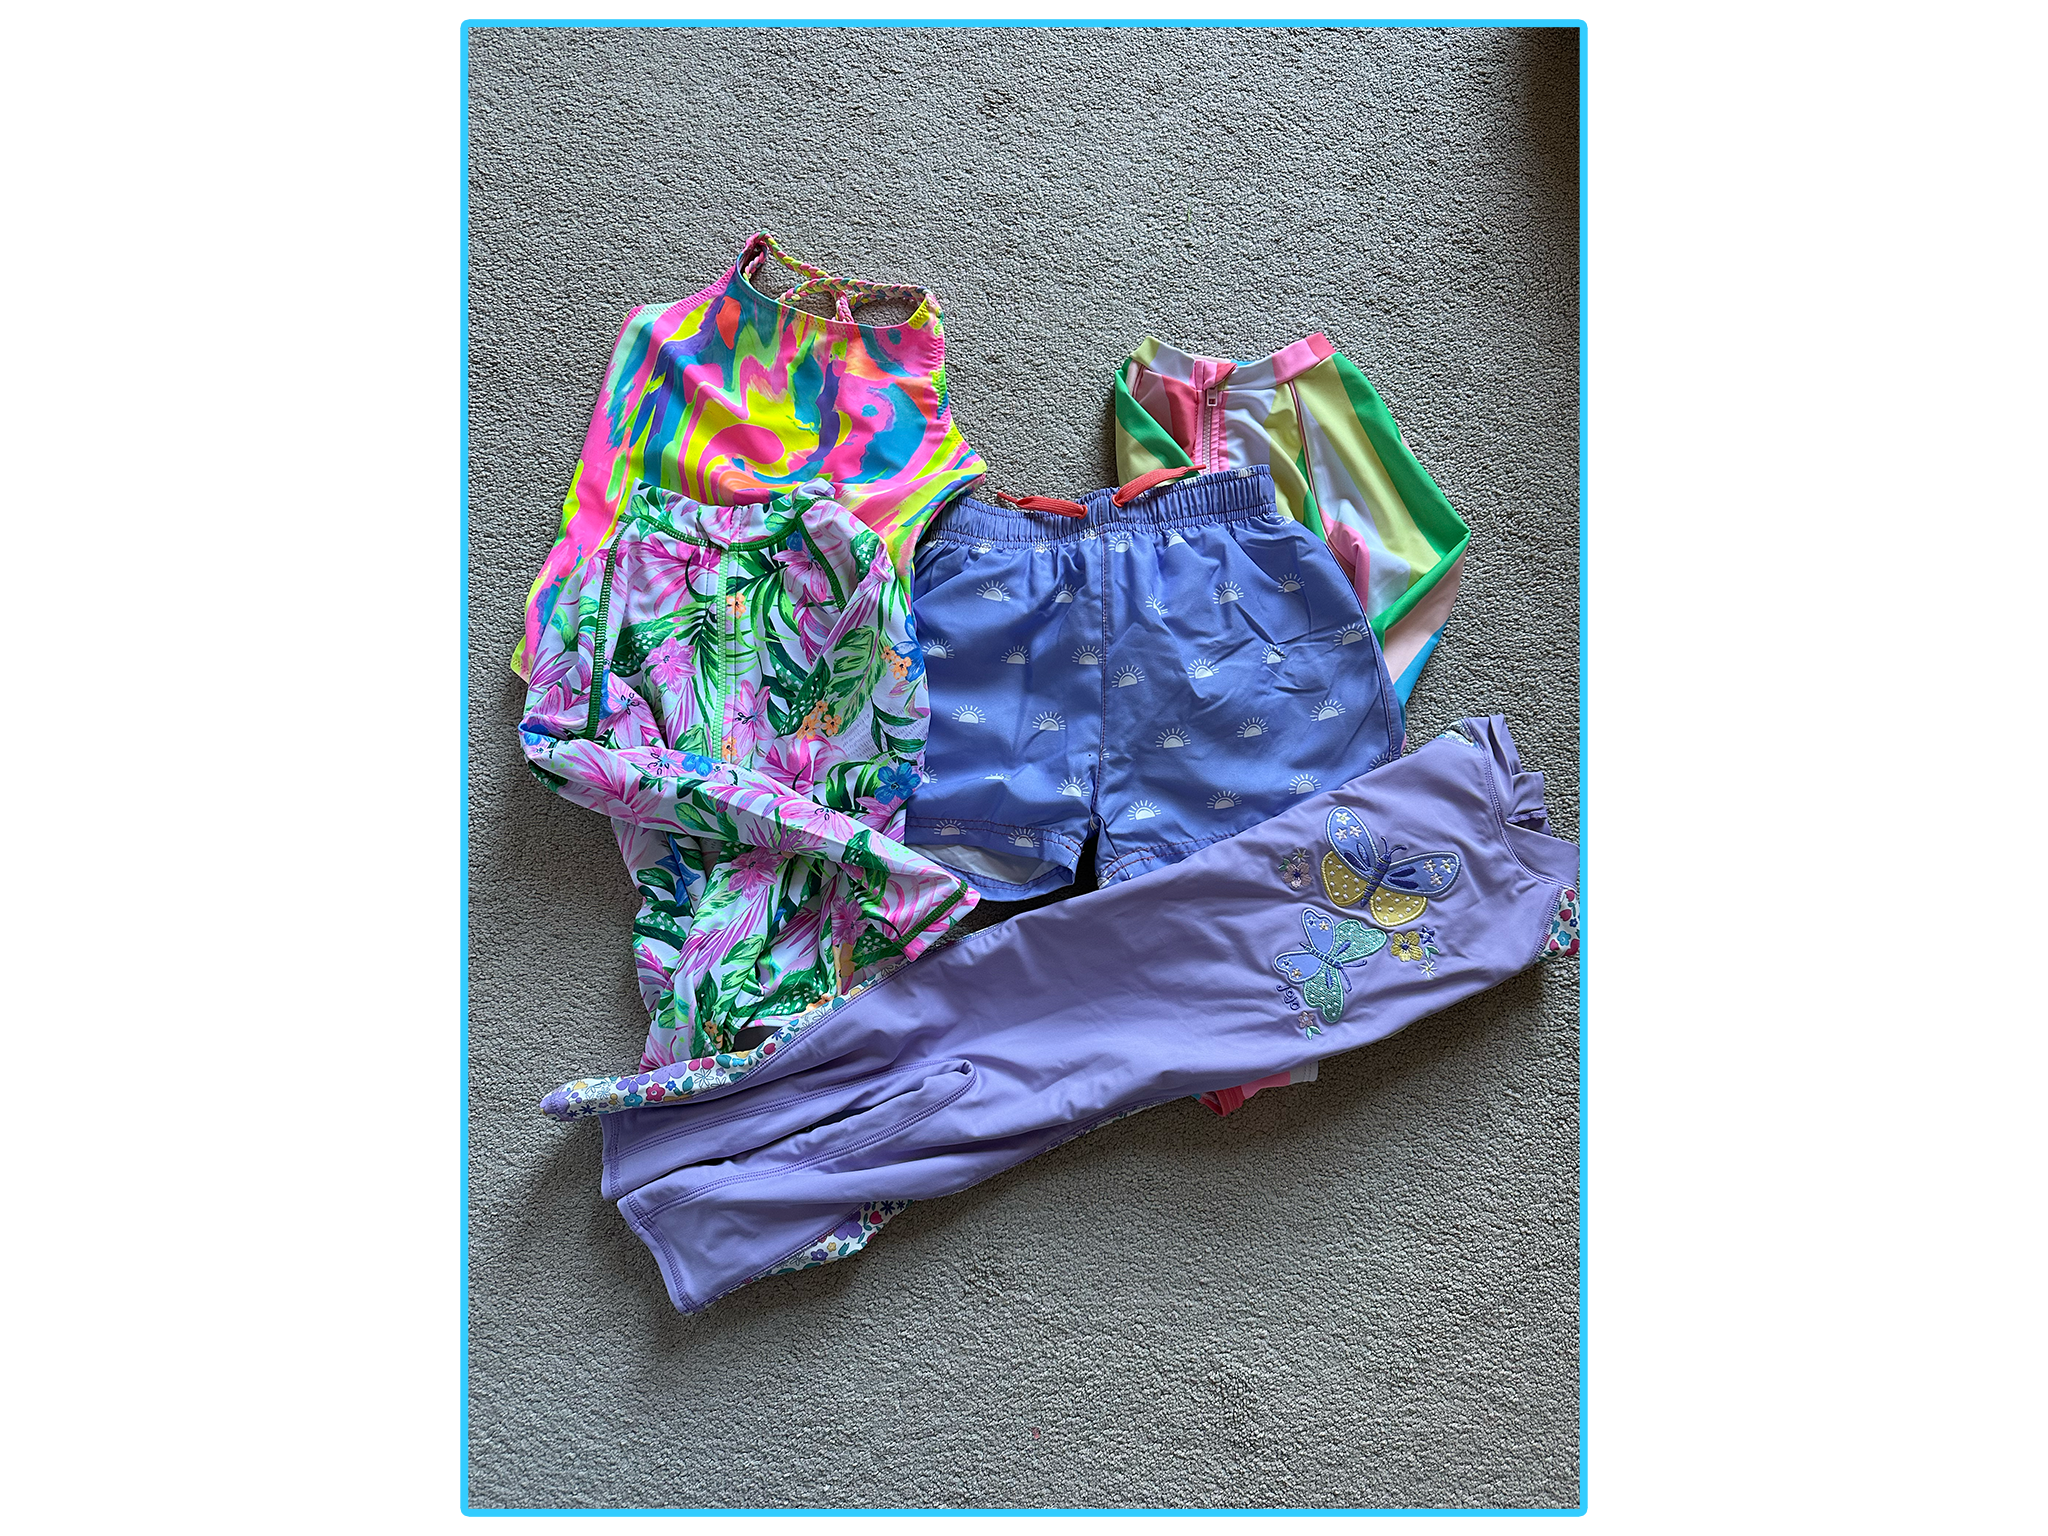 A selection of the swimming costumes we took for a dip